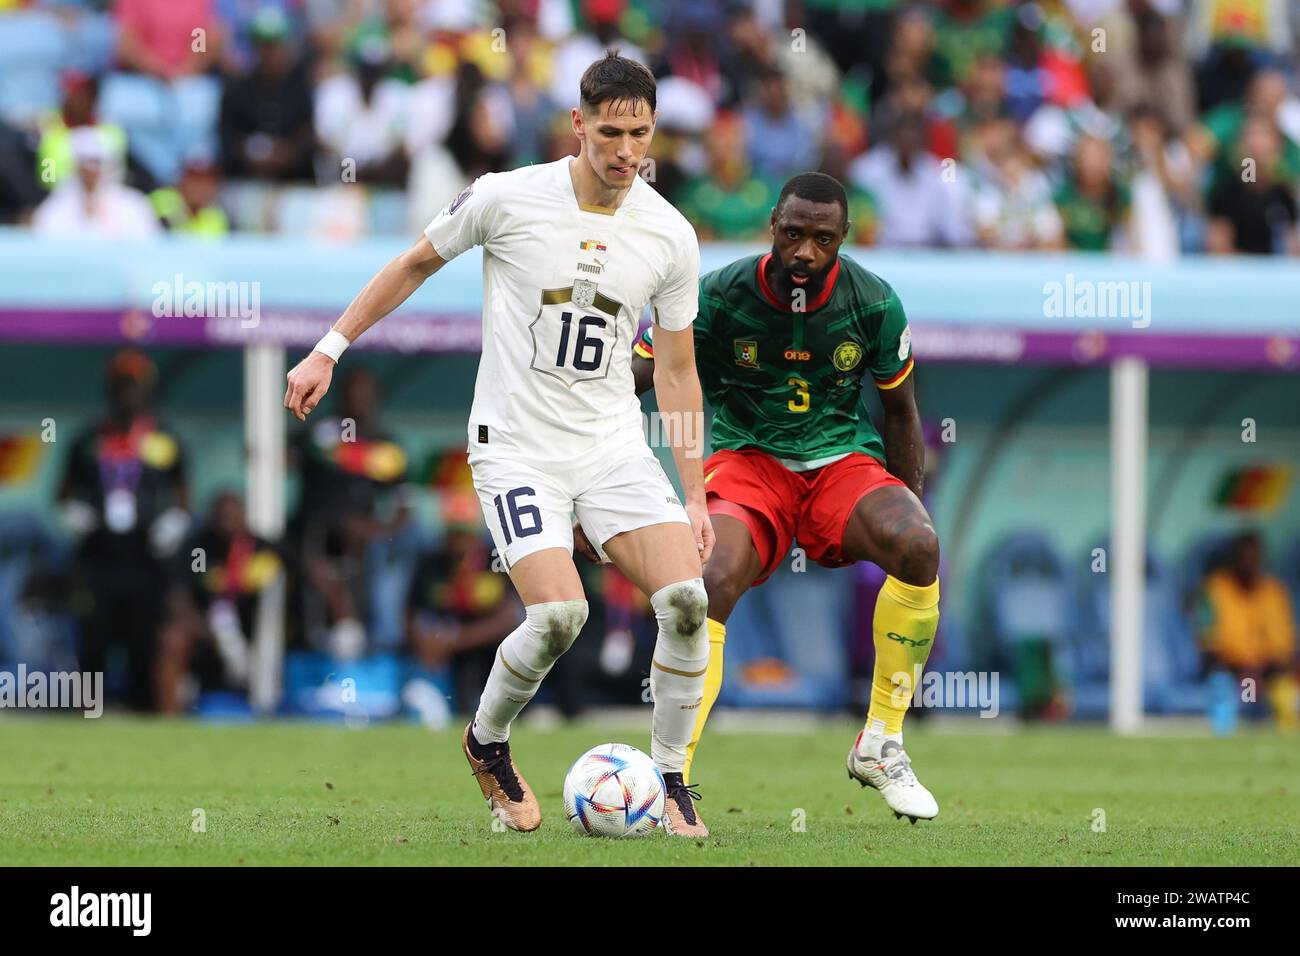 Sasa Lukic of Serbia (L) and Nicolas NKoulou of Cameroon (R) in action during the FIFA World Cup Qatar 2022 match between Cameroon and Serbia at Al Janoub Stadium. Final score: Cameroon 3:3 Serbia. Stock Photo